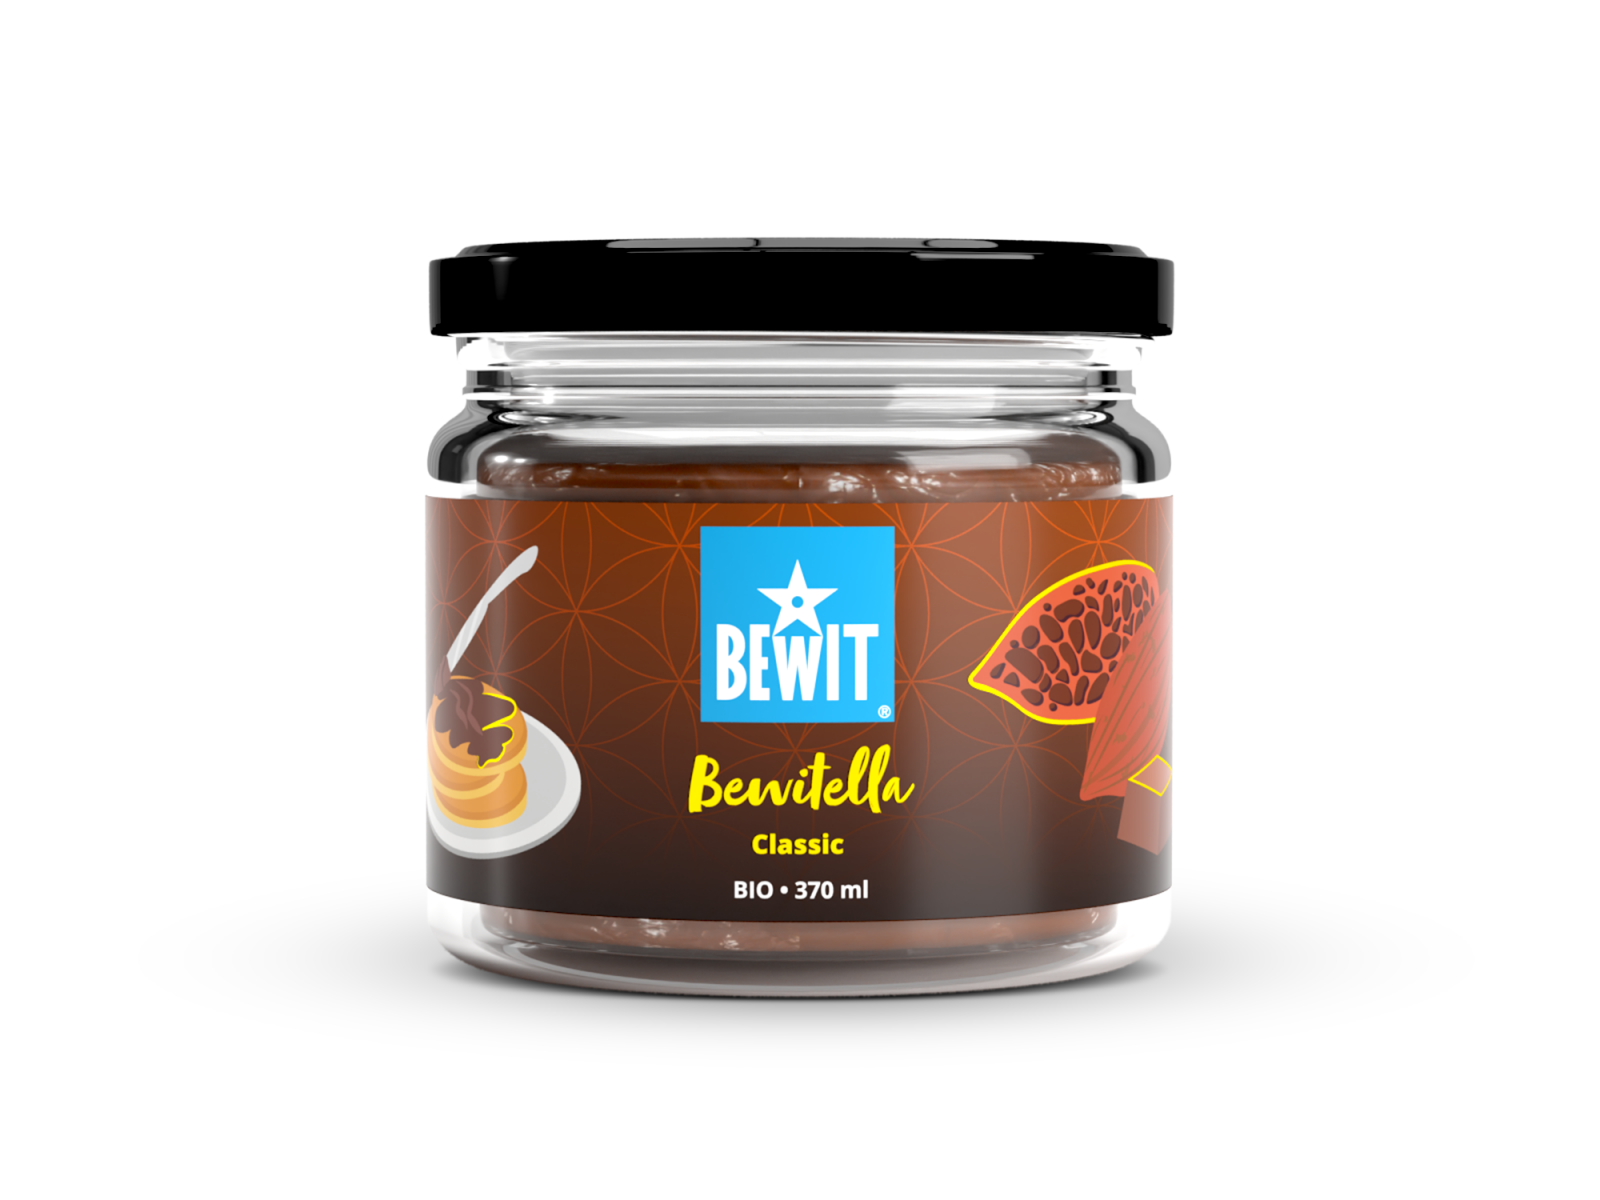 Organic Bewitella Classic - DELICIOUS CREAM / SPREAD MADE FROM COCOA BEANS AND OTHER SUPERFOODS - 1